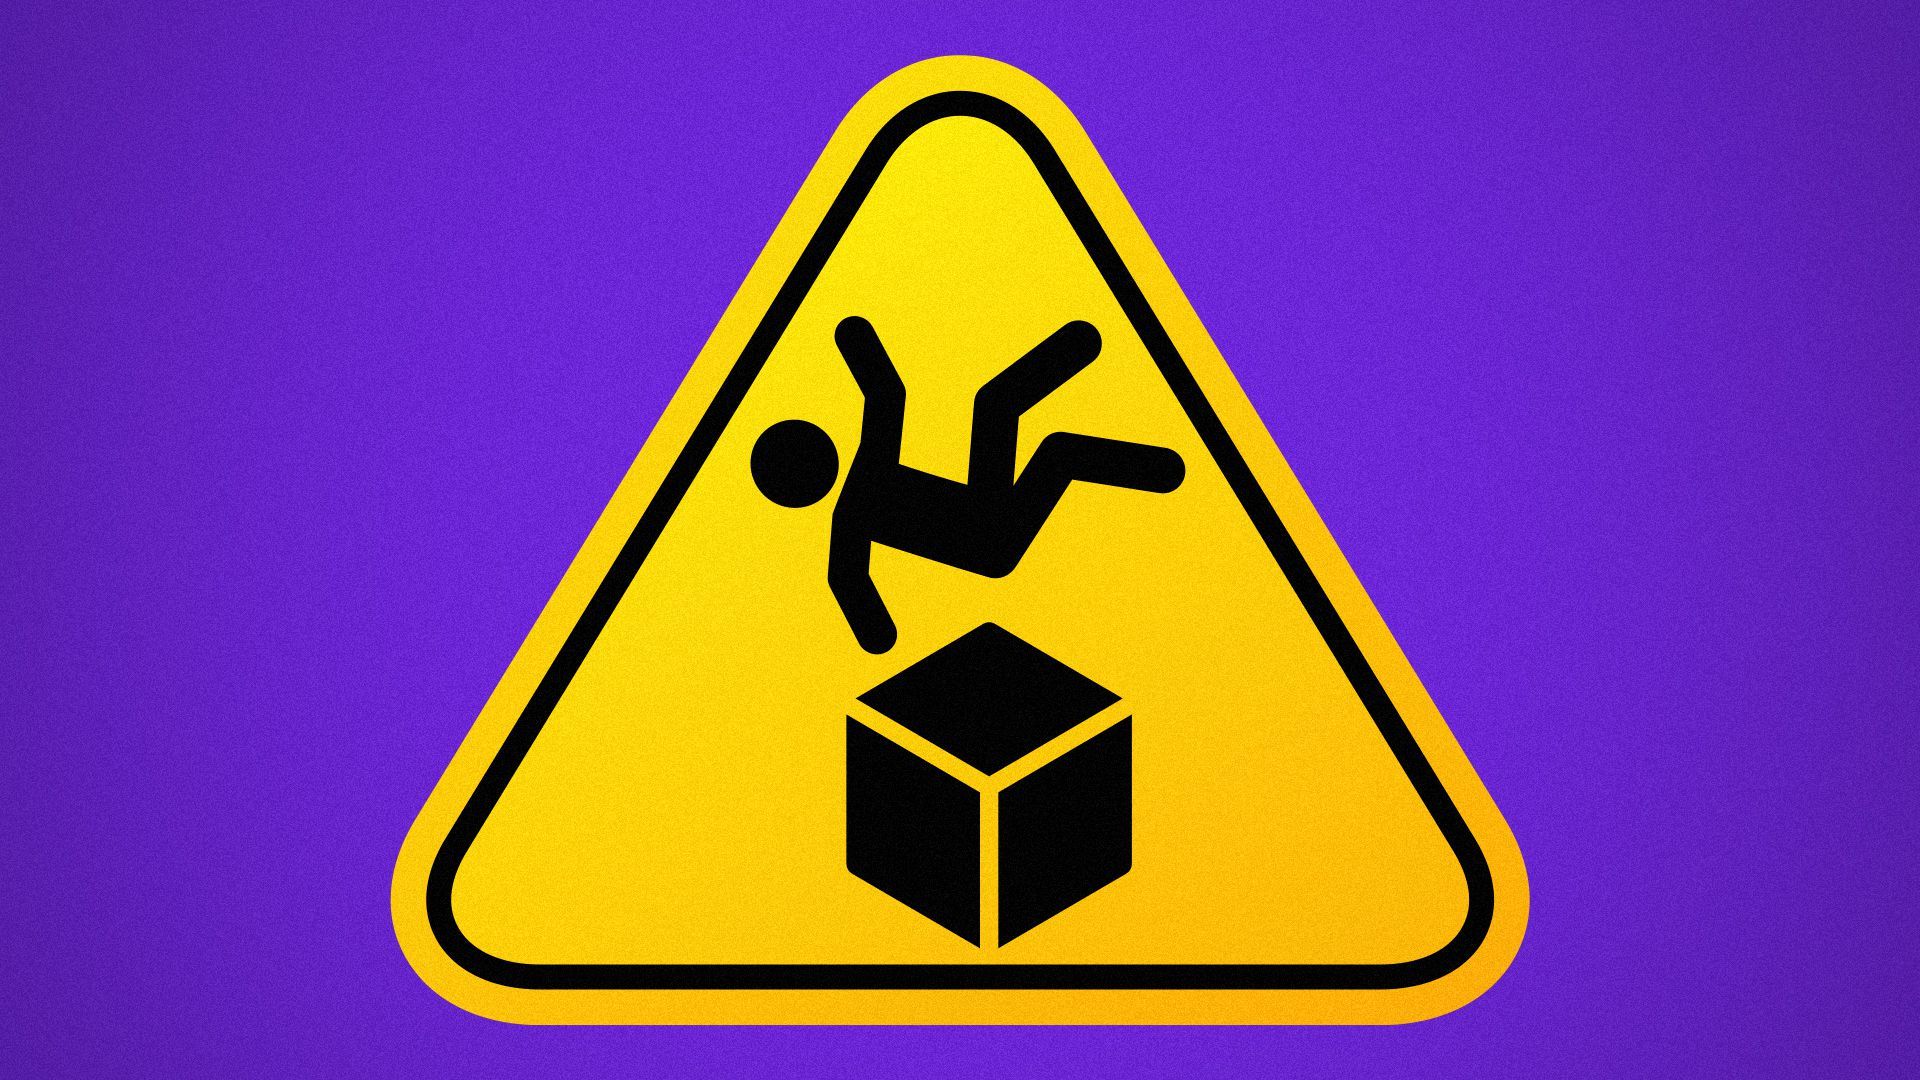 Illustration of a caution sign with a person falling off of a cube.